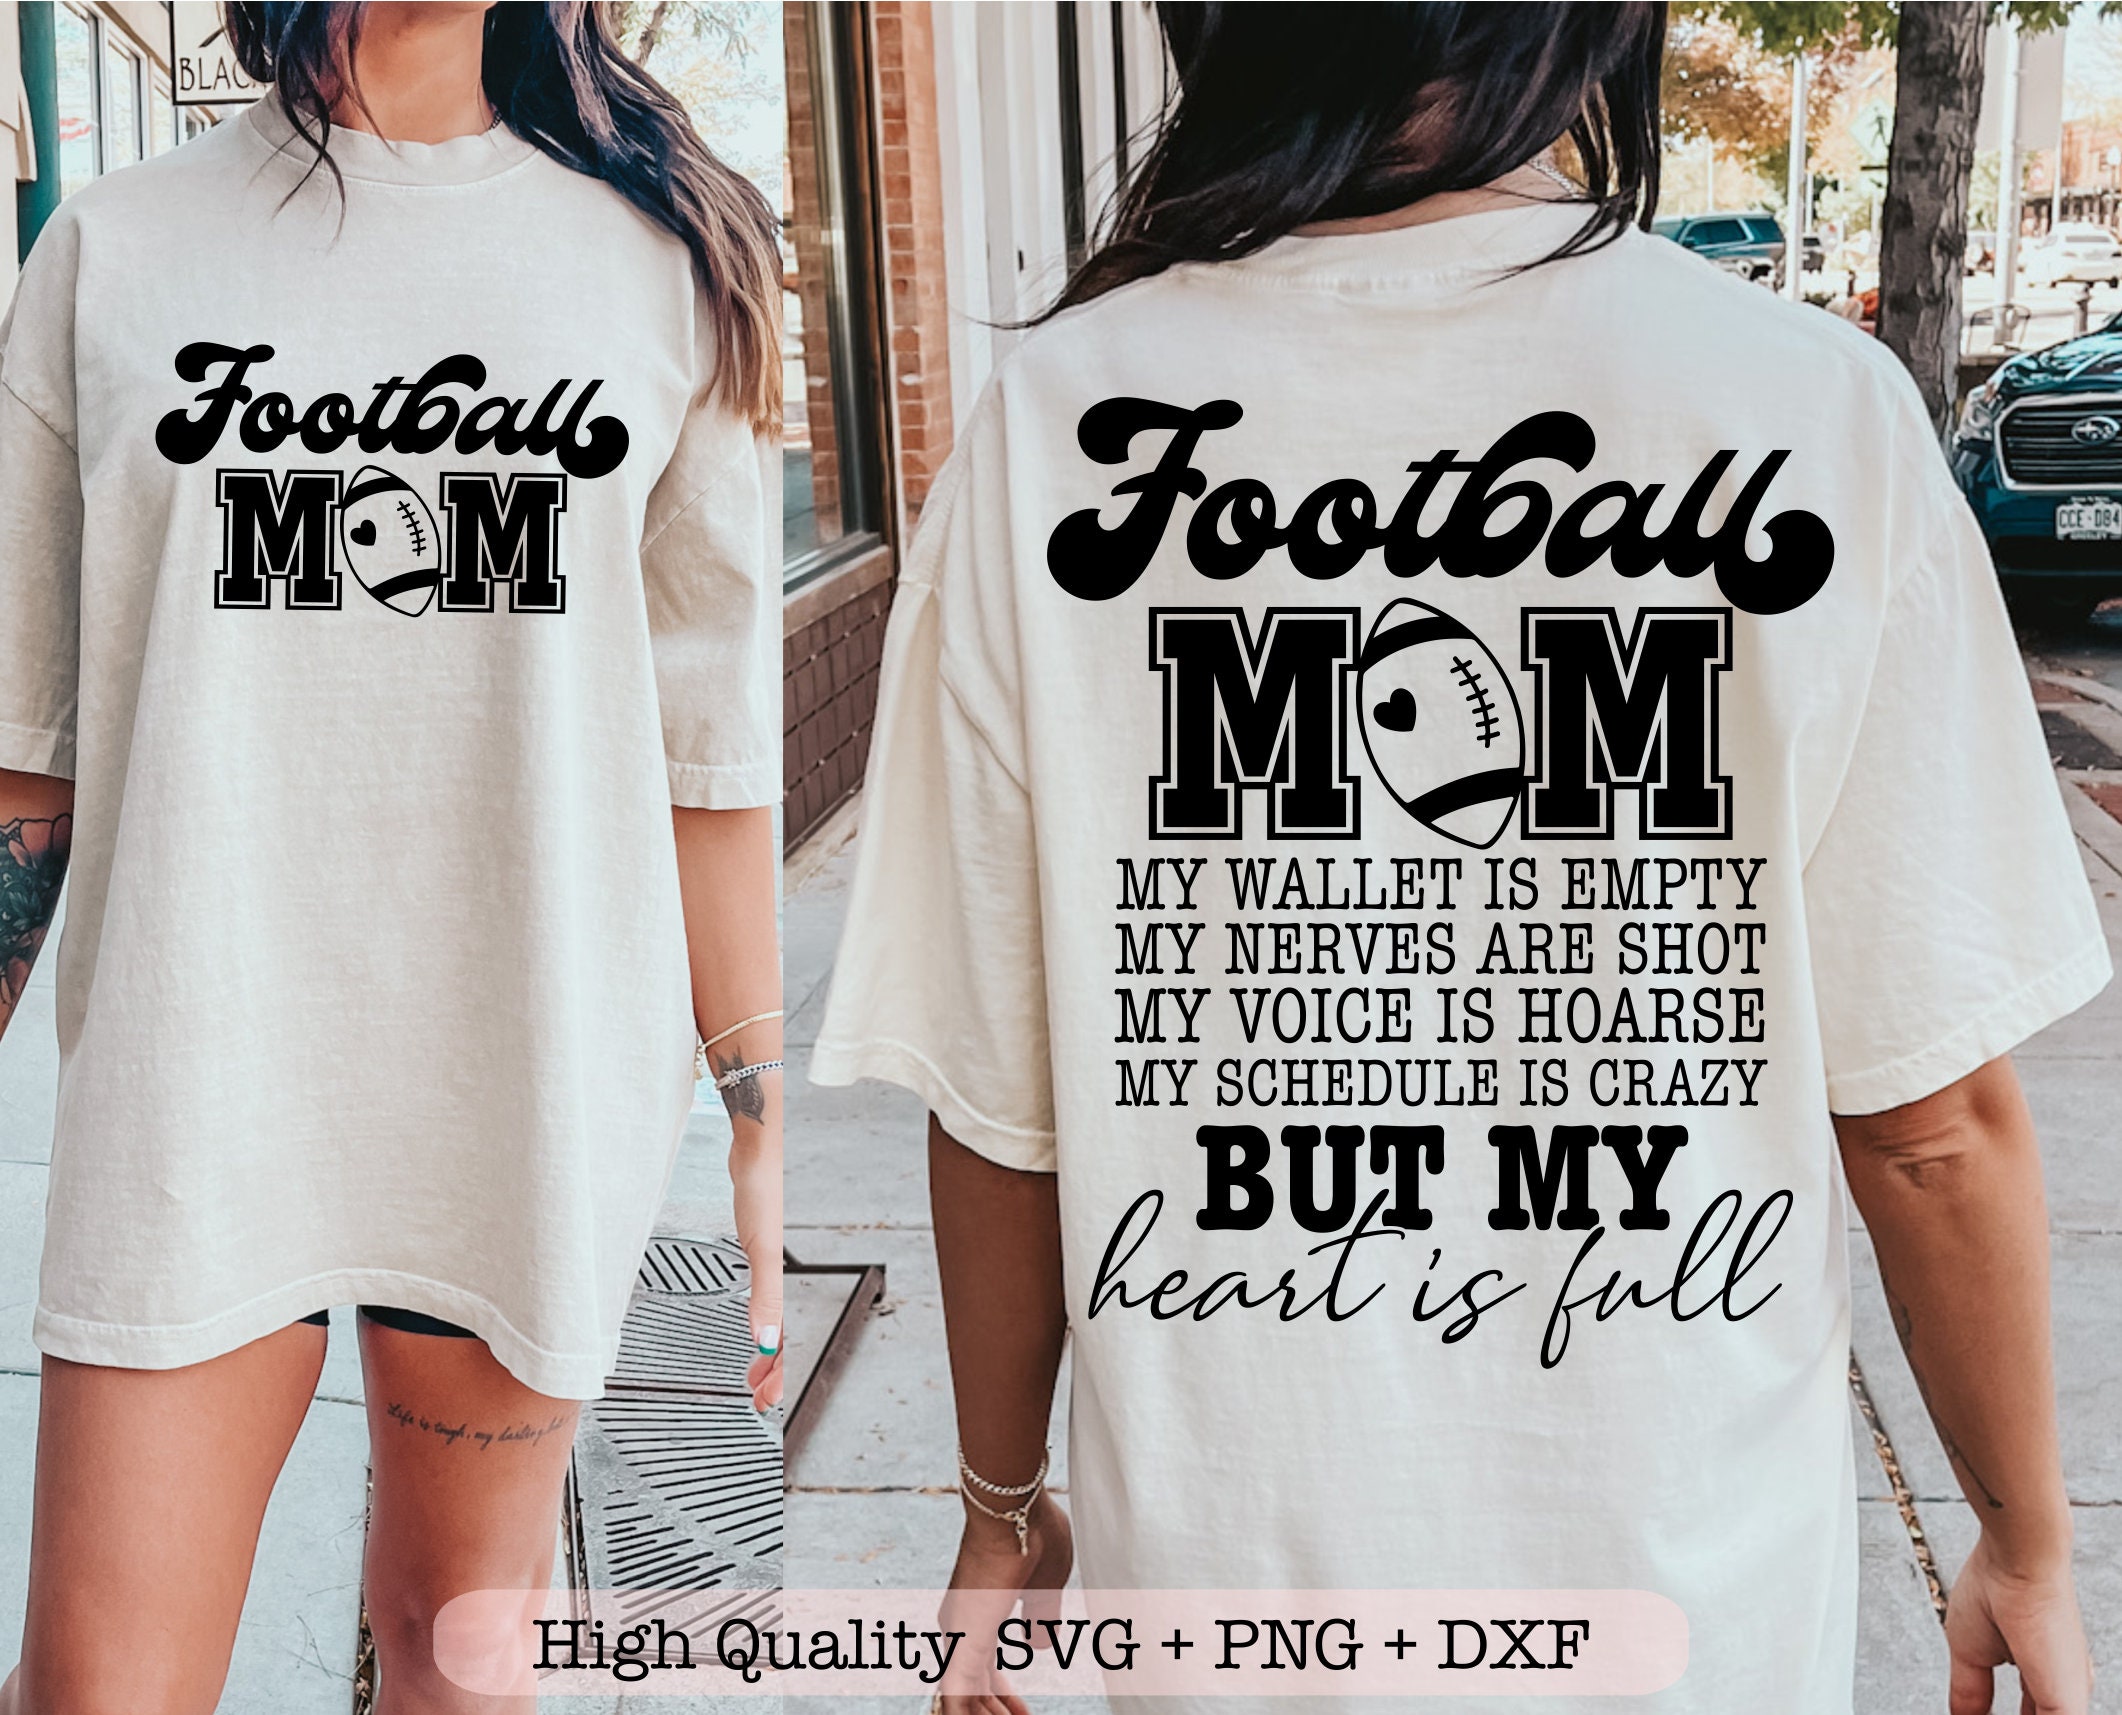 Football Tee - That's My Grand Son Out There Football - Football Shirt - Football  Shirts - Football Grandma Shirt Tshirt Funny Sarcastic Humor Comical Tee